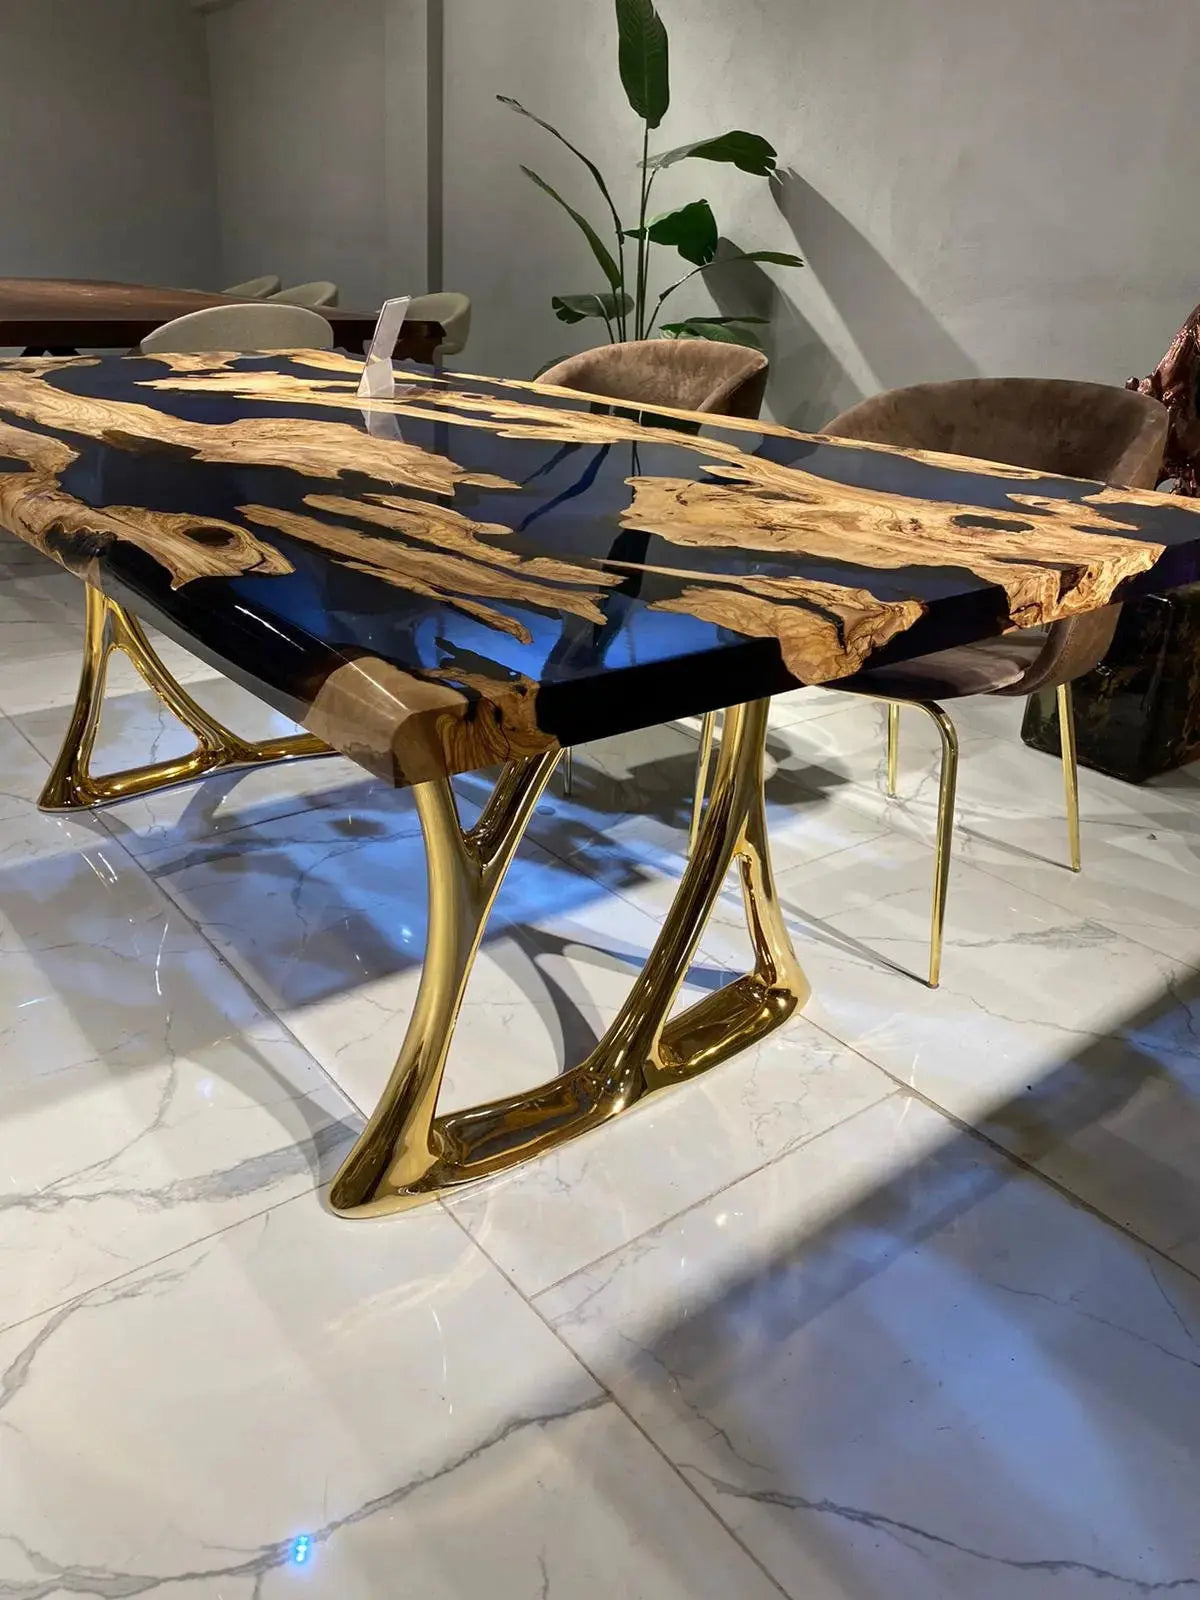 Custom Order Olive Wood Table Top | Blue Resin Wood Table | Live Edge Table Top